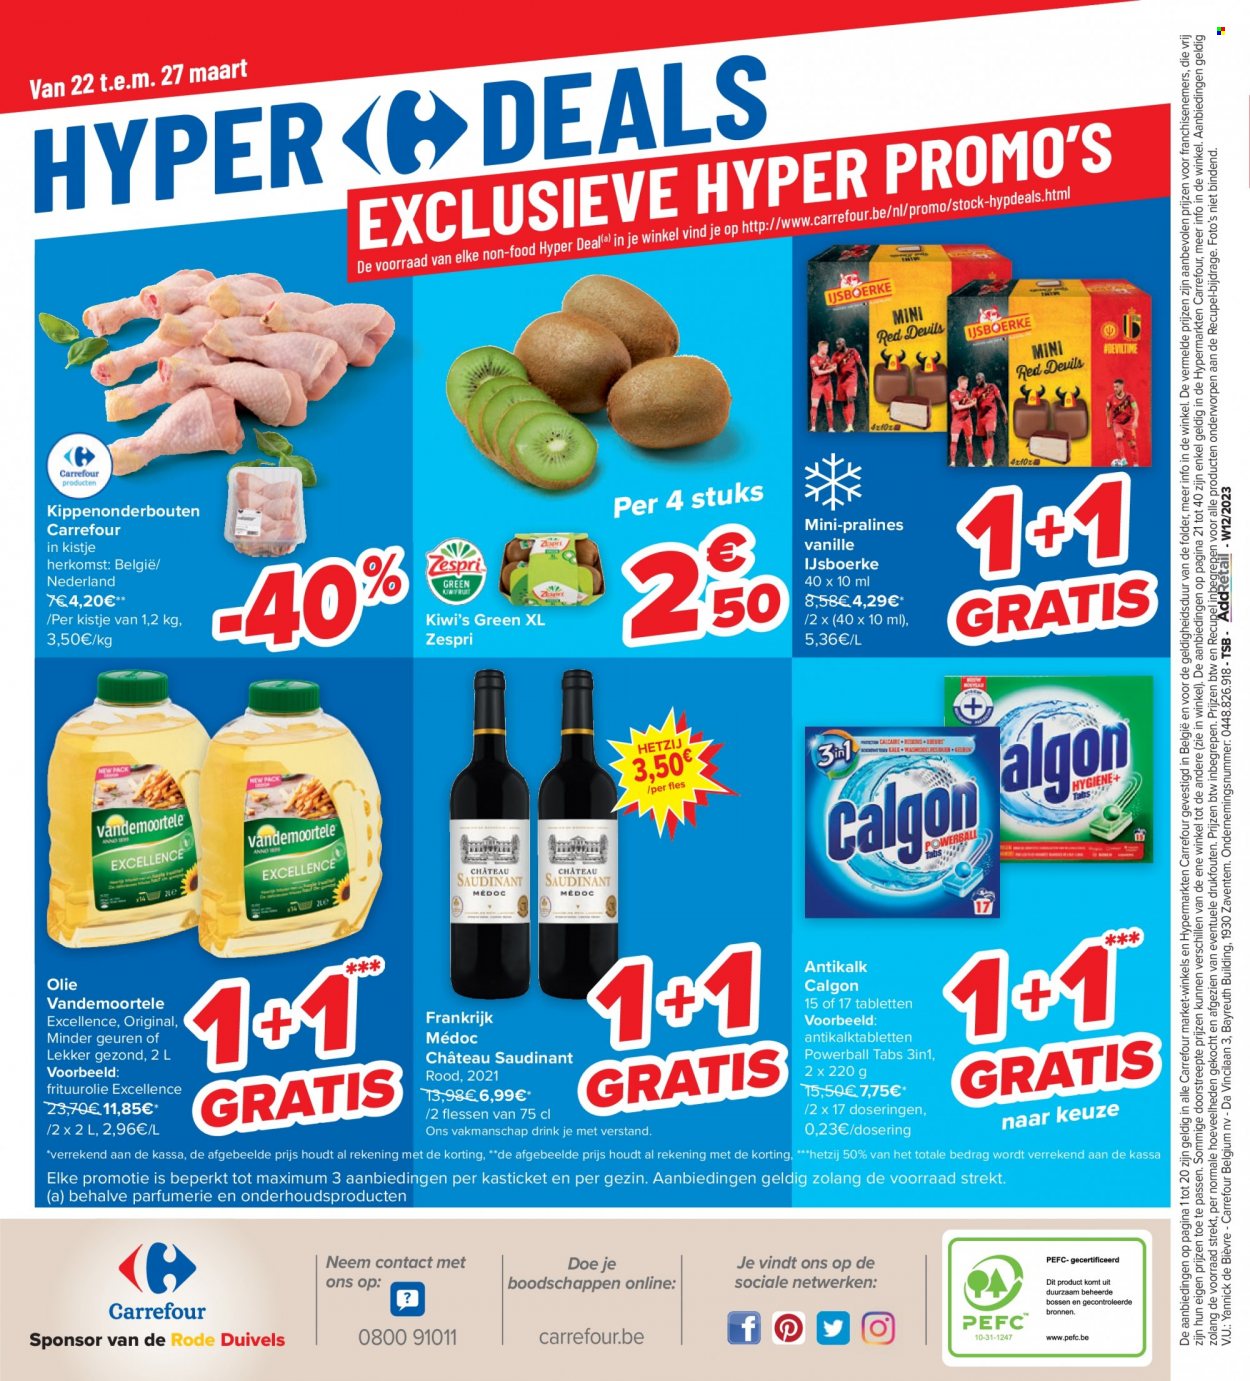 Catalogue Carrefour hypermarkt - 22.3.2023 - 3.4.2023. Page 20.